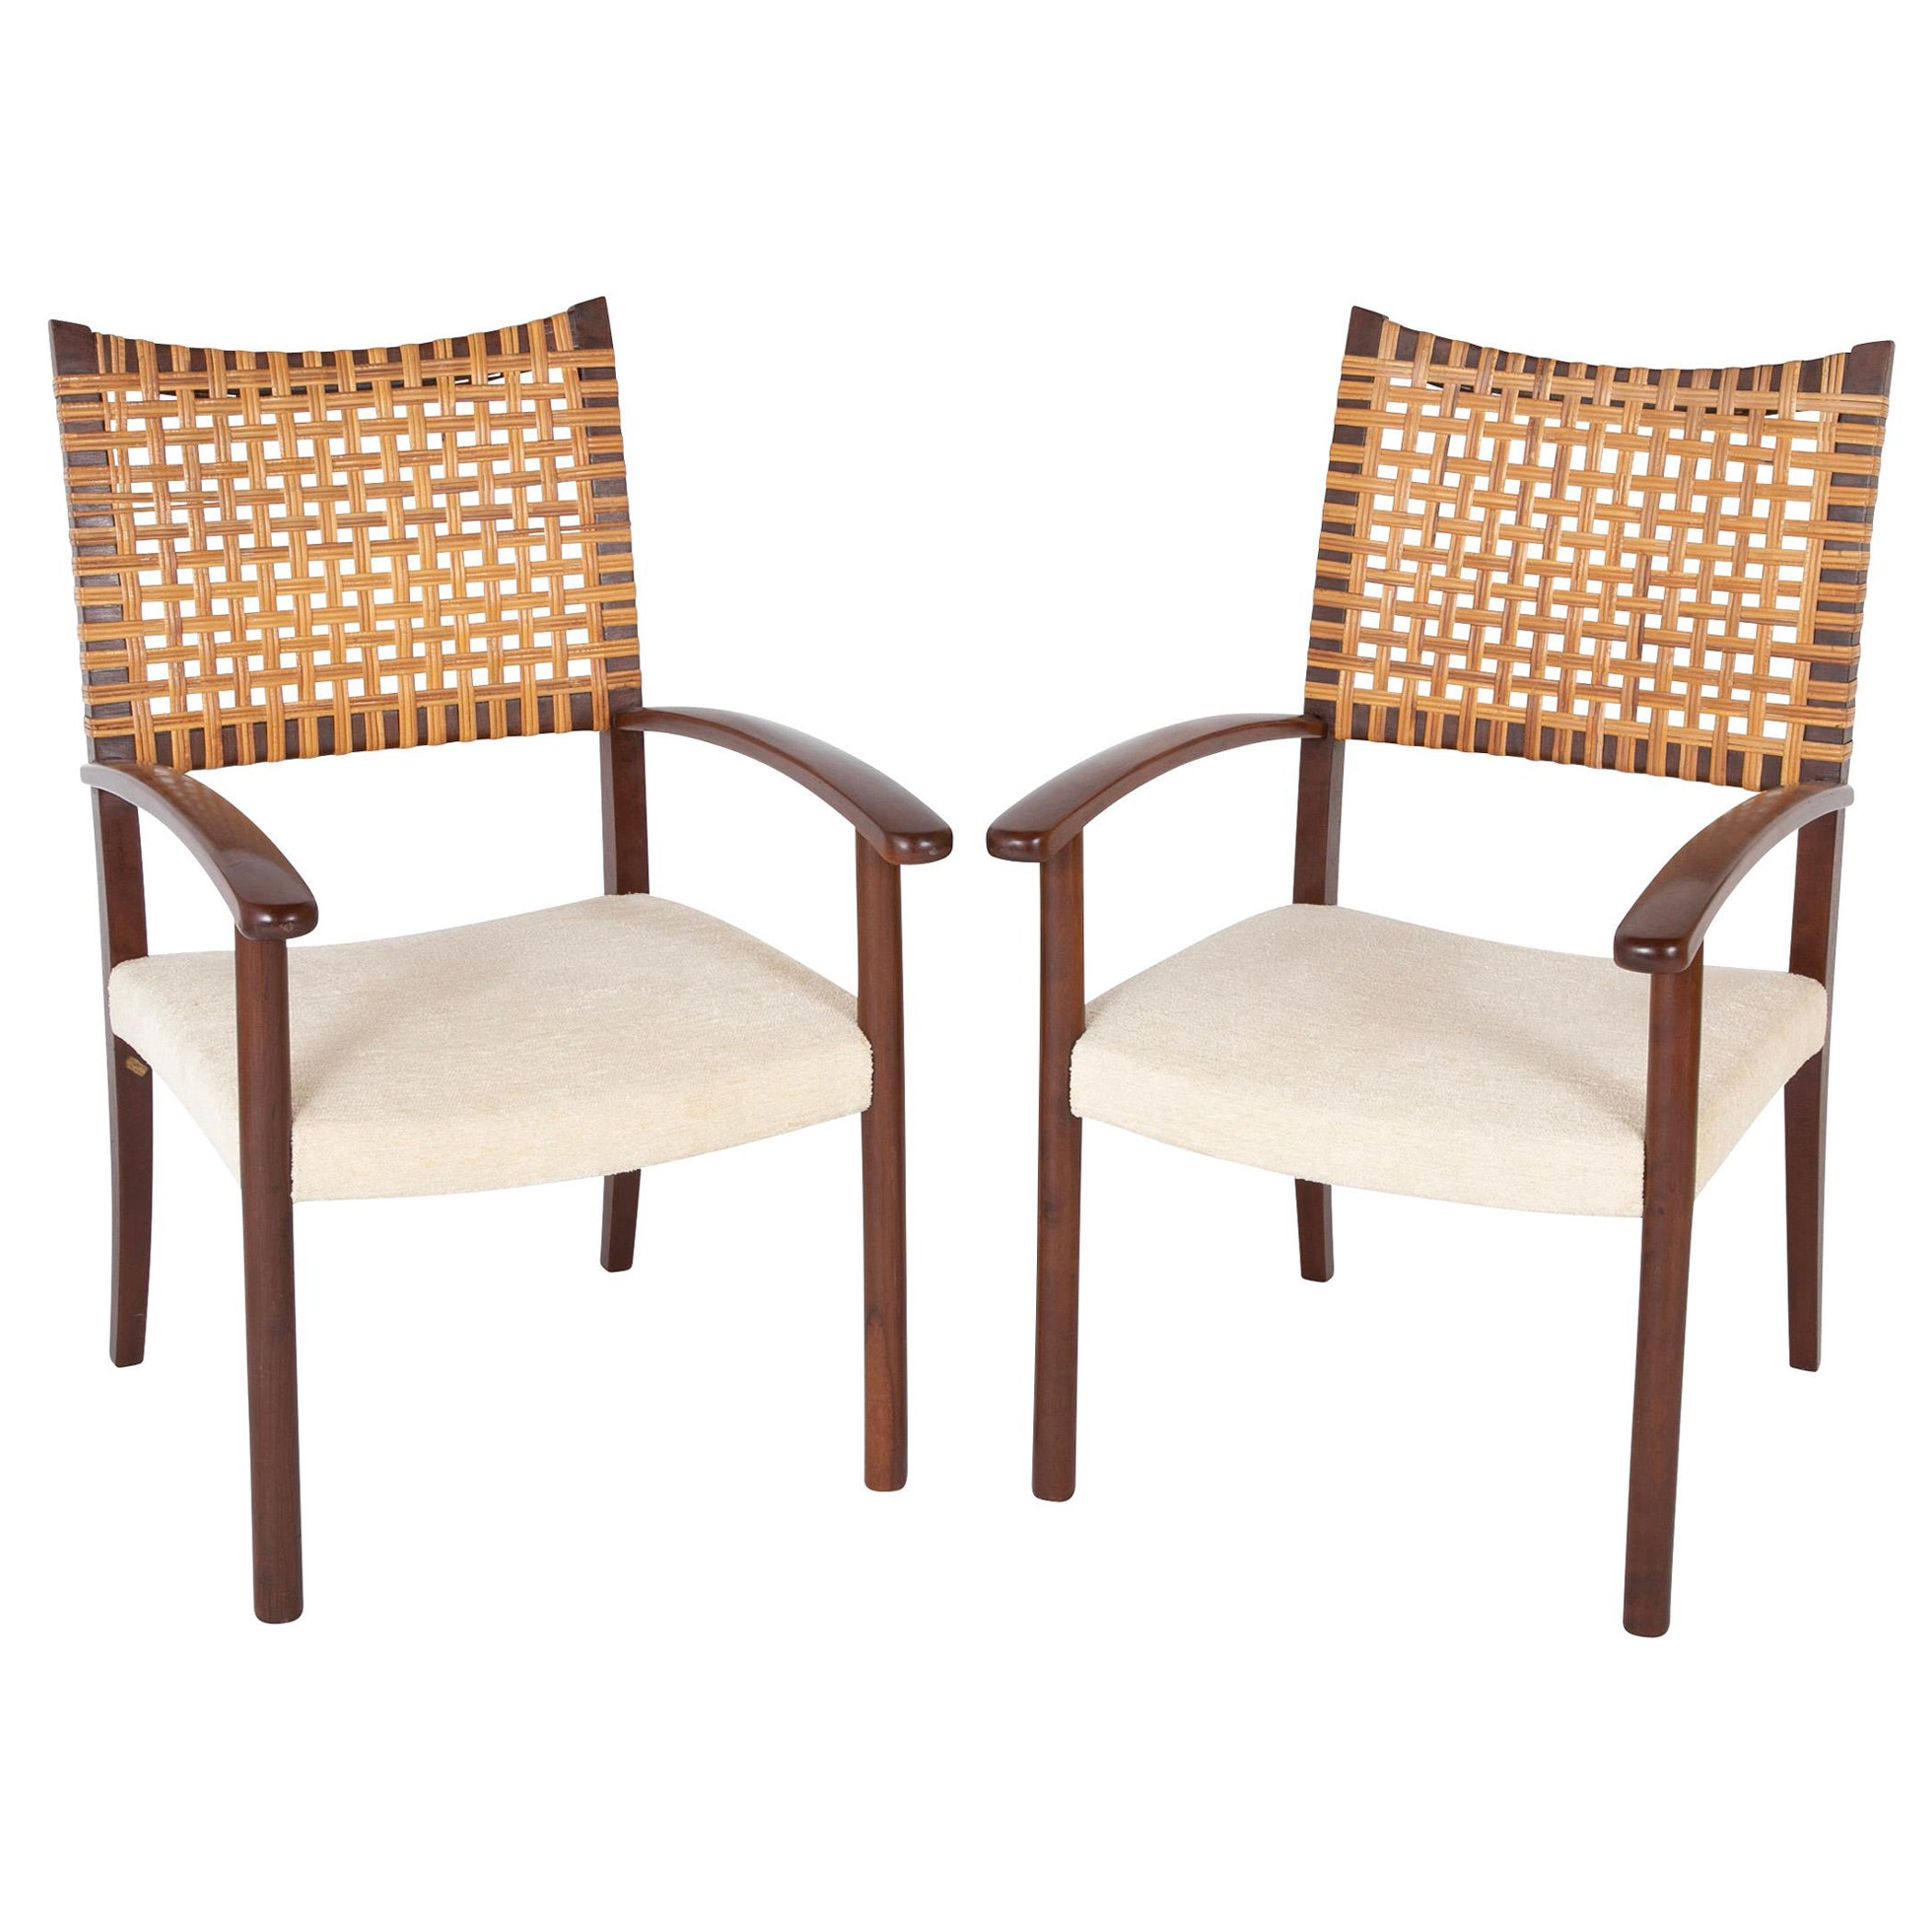 Pair of Open Arm Chairs with Caned Backs by Adolfo Foltas For Sale